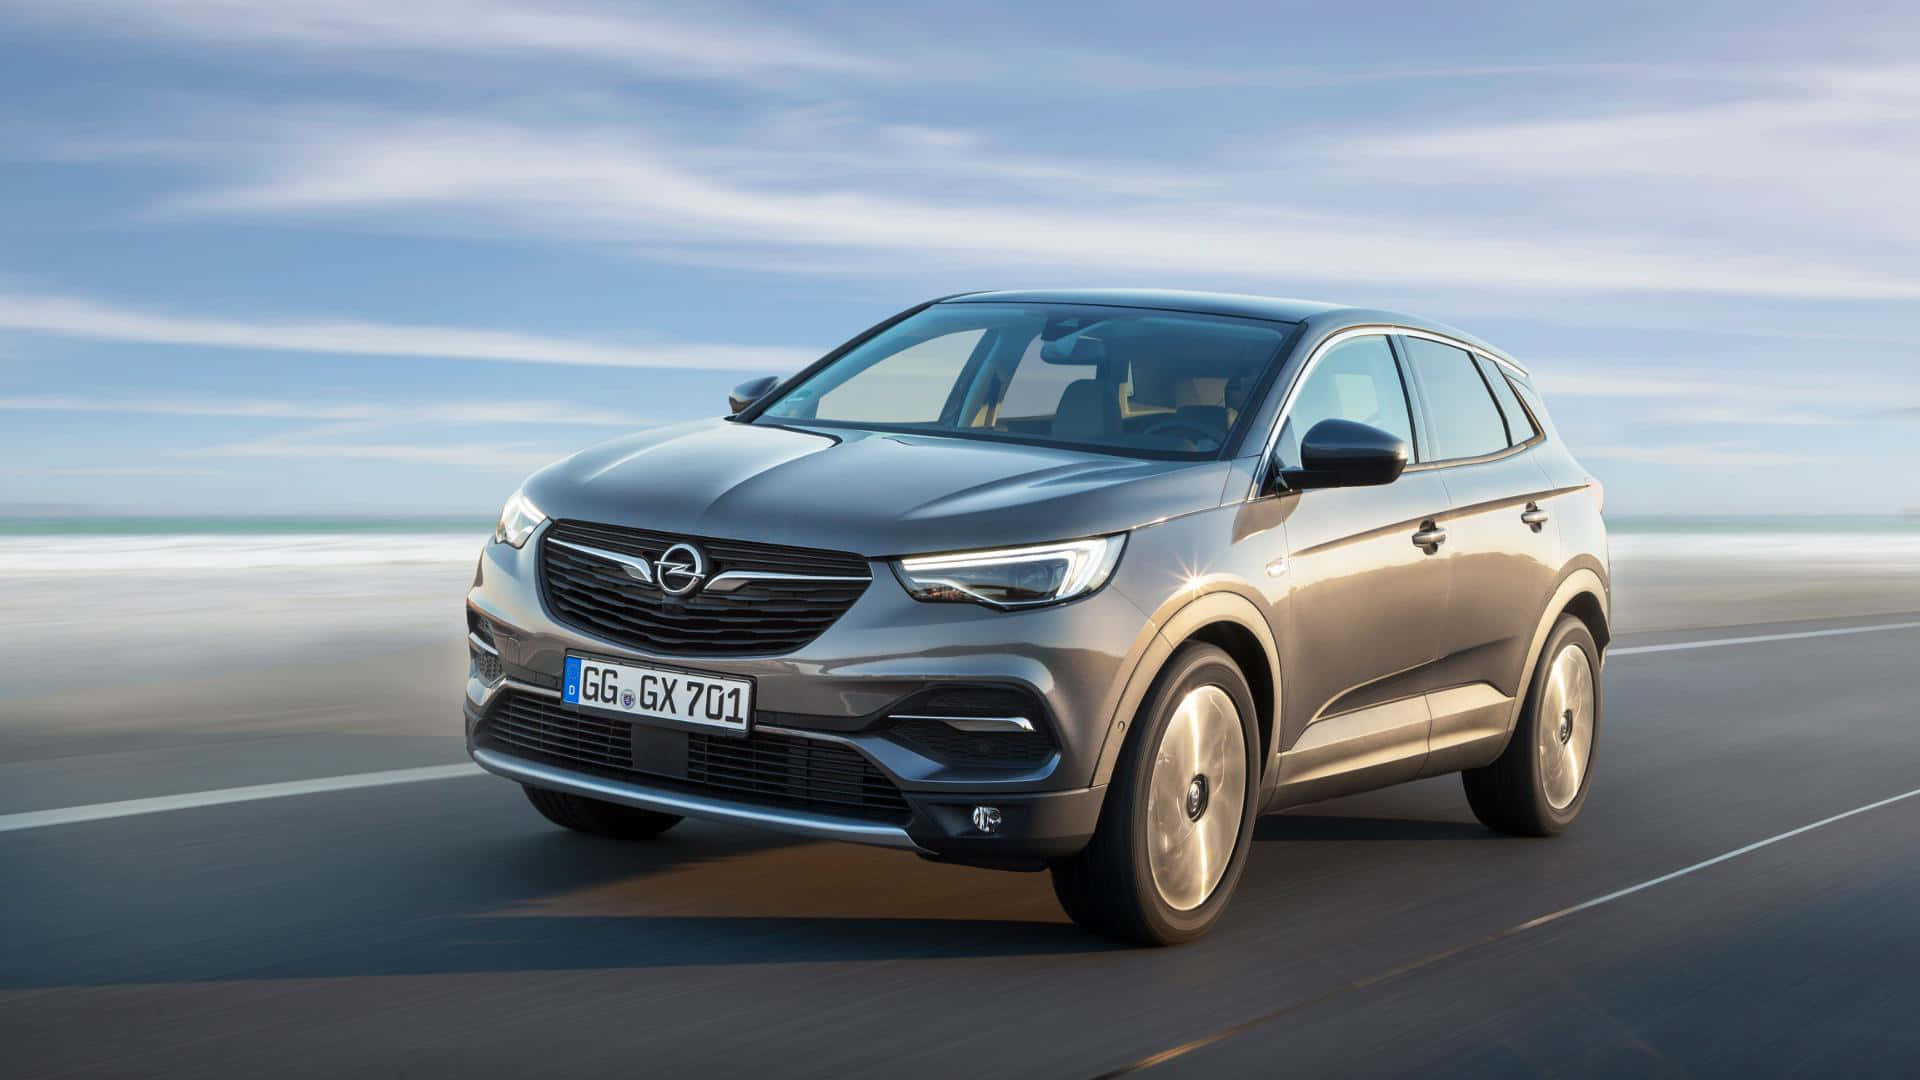 Opel Grandland X - Dynamic and Sophisticated SUV Wallpaper